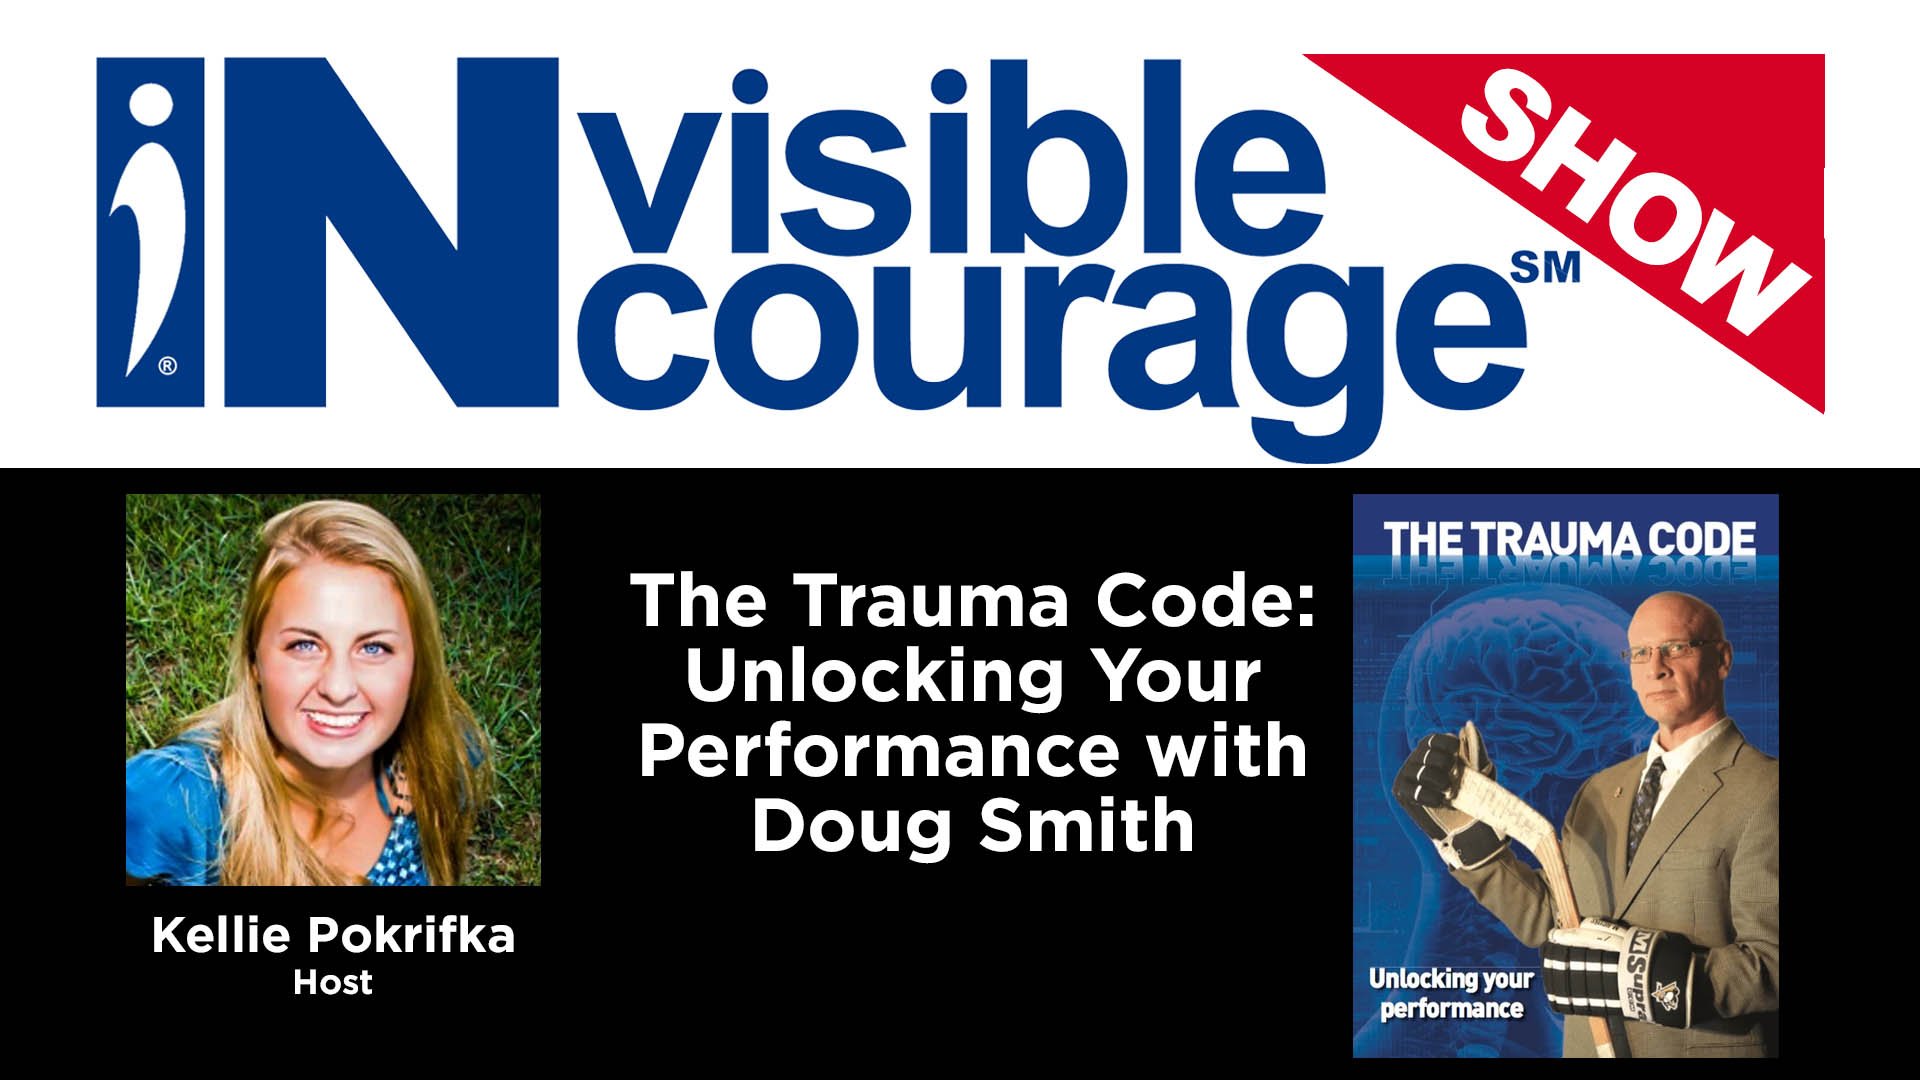 InVisible InCourage Show Episode 2 - The Trauma Code Doug Smith - Invisible Disabilities Association